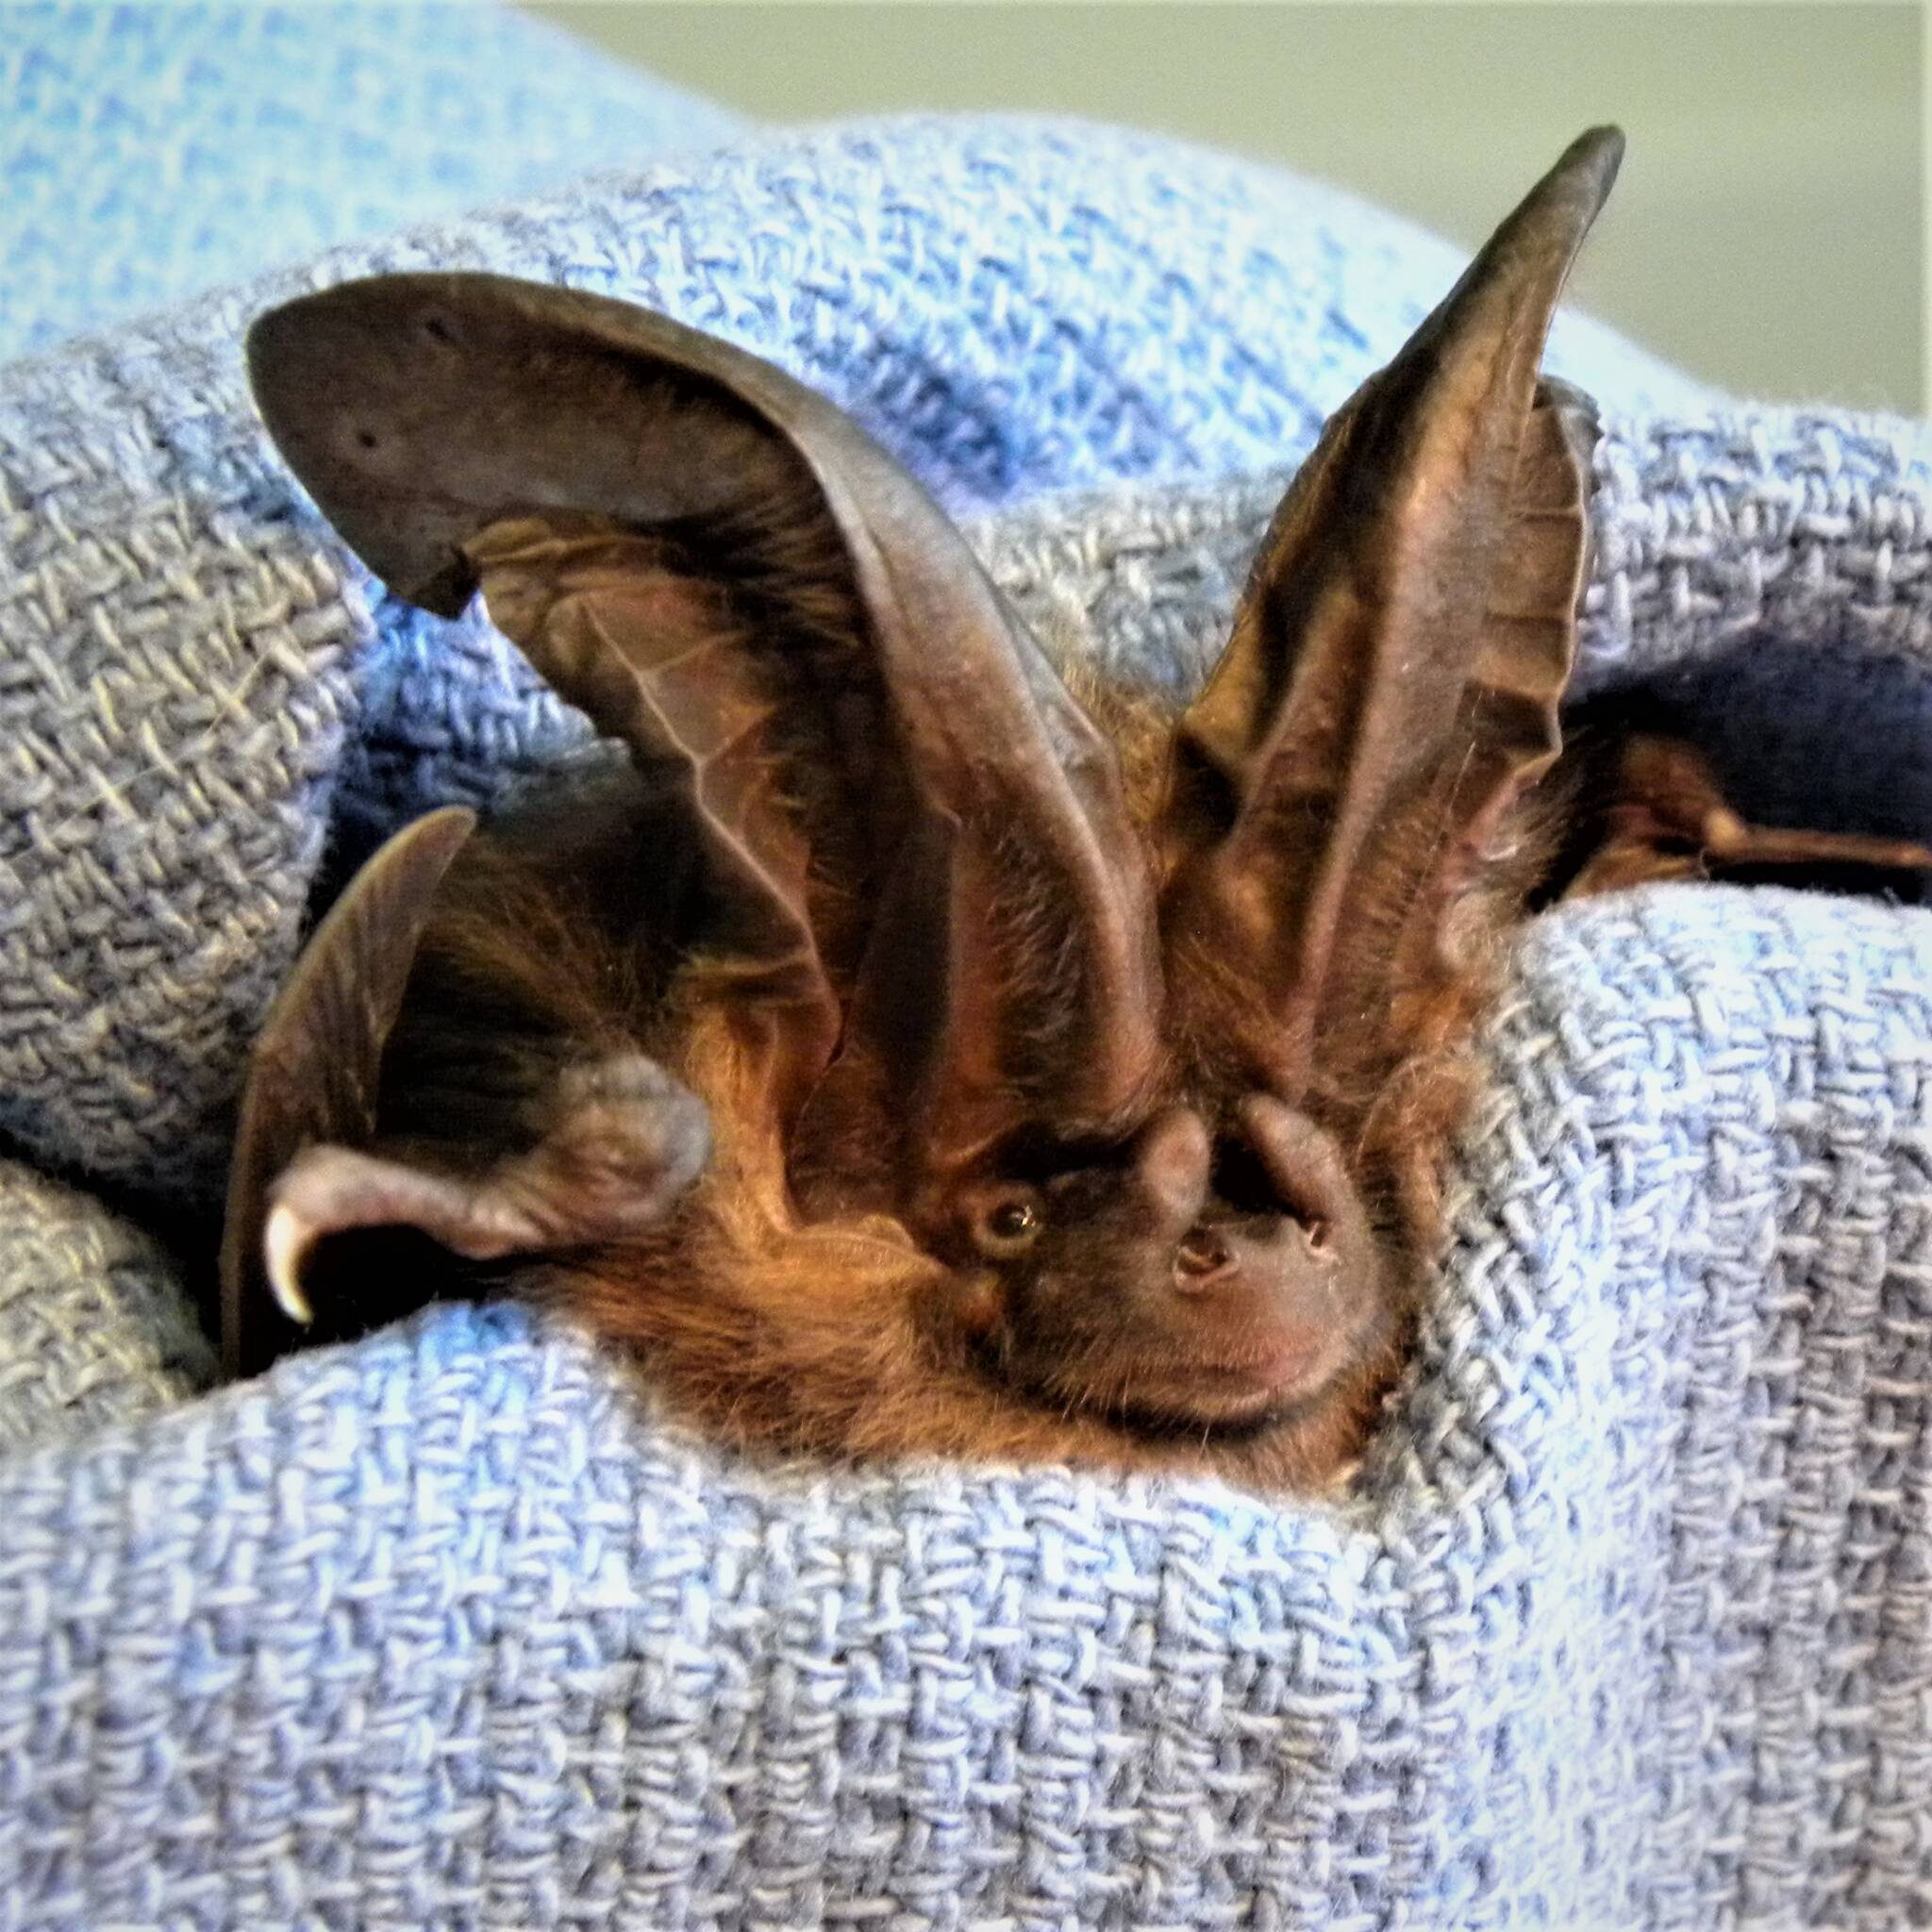 Contributed photo by Wolf Hollow Wildlife Rehabilitation Center.
A Townsend’s Big-Eared Bat in Wolf Hollow’s care.